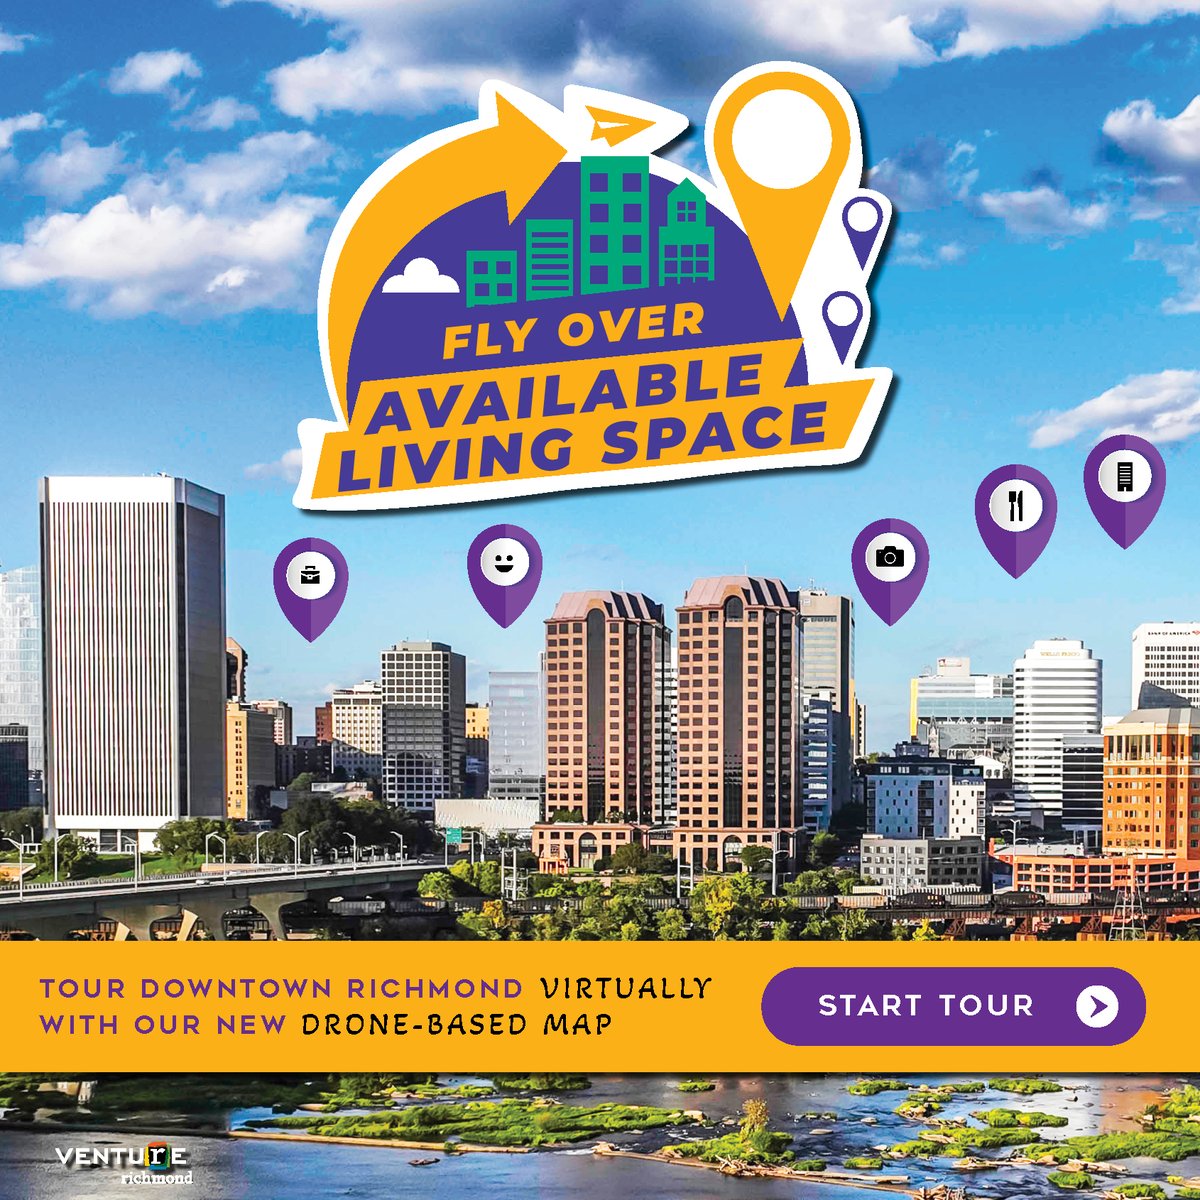 We just launched a drone-based mapping program on our website that highlights available office & living space and allows YOU to tour #DowntownRVA virtually! 🏙️ 

Check it out now and explore downtown like you never have before → bit.ly/4b85l0W